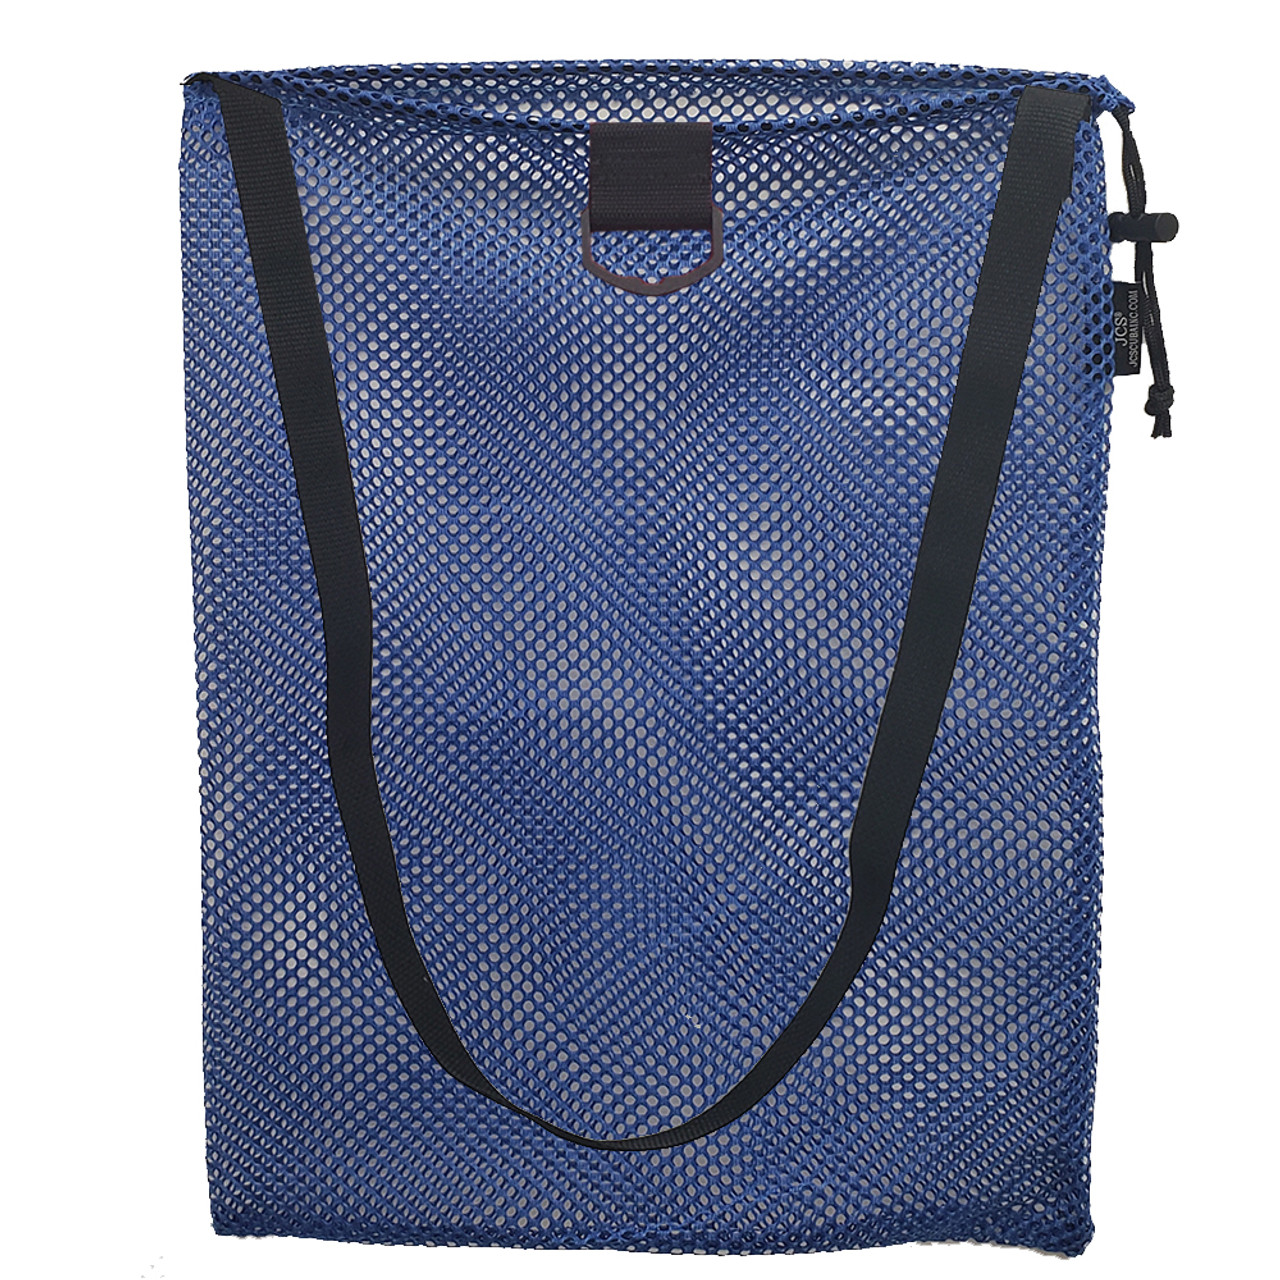 Nylon Mesh Drawstring Tote Bag with Shoulder Strap and D-Ring, Approx. 15x20, Blue